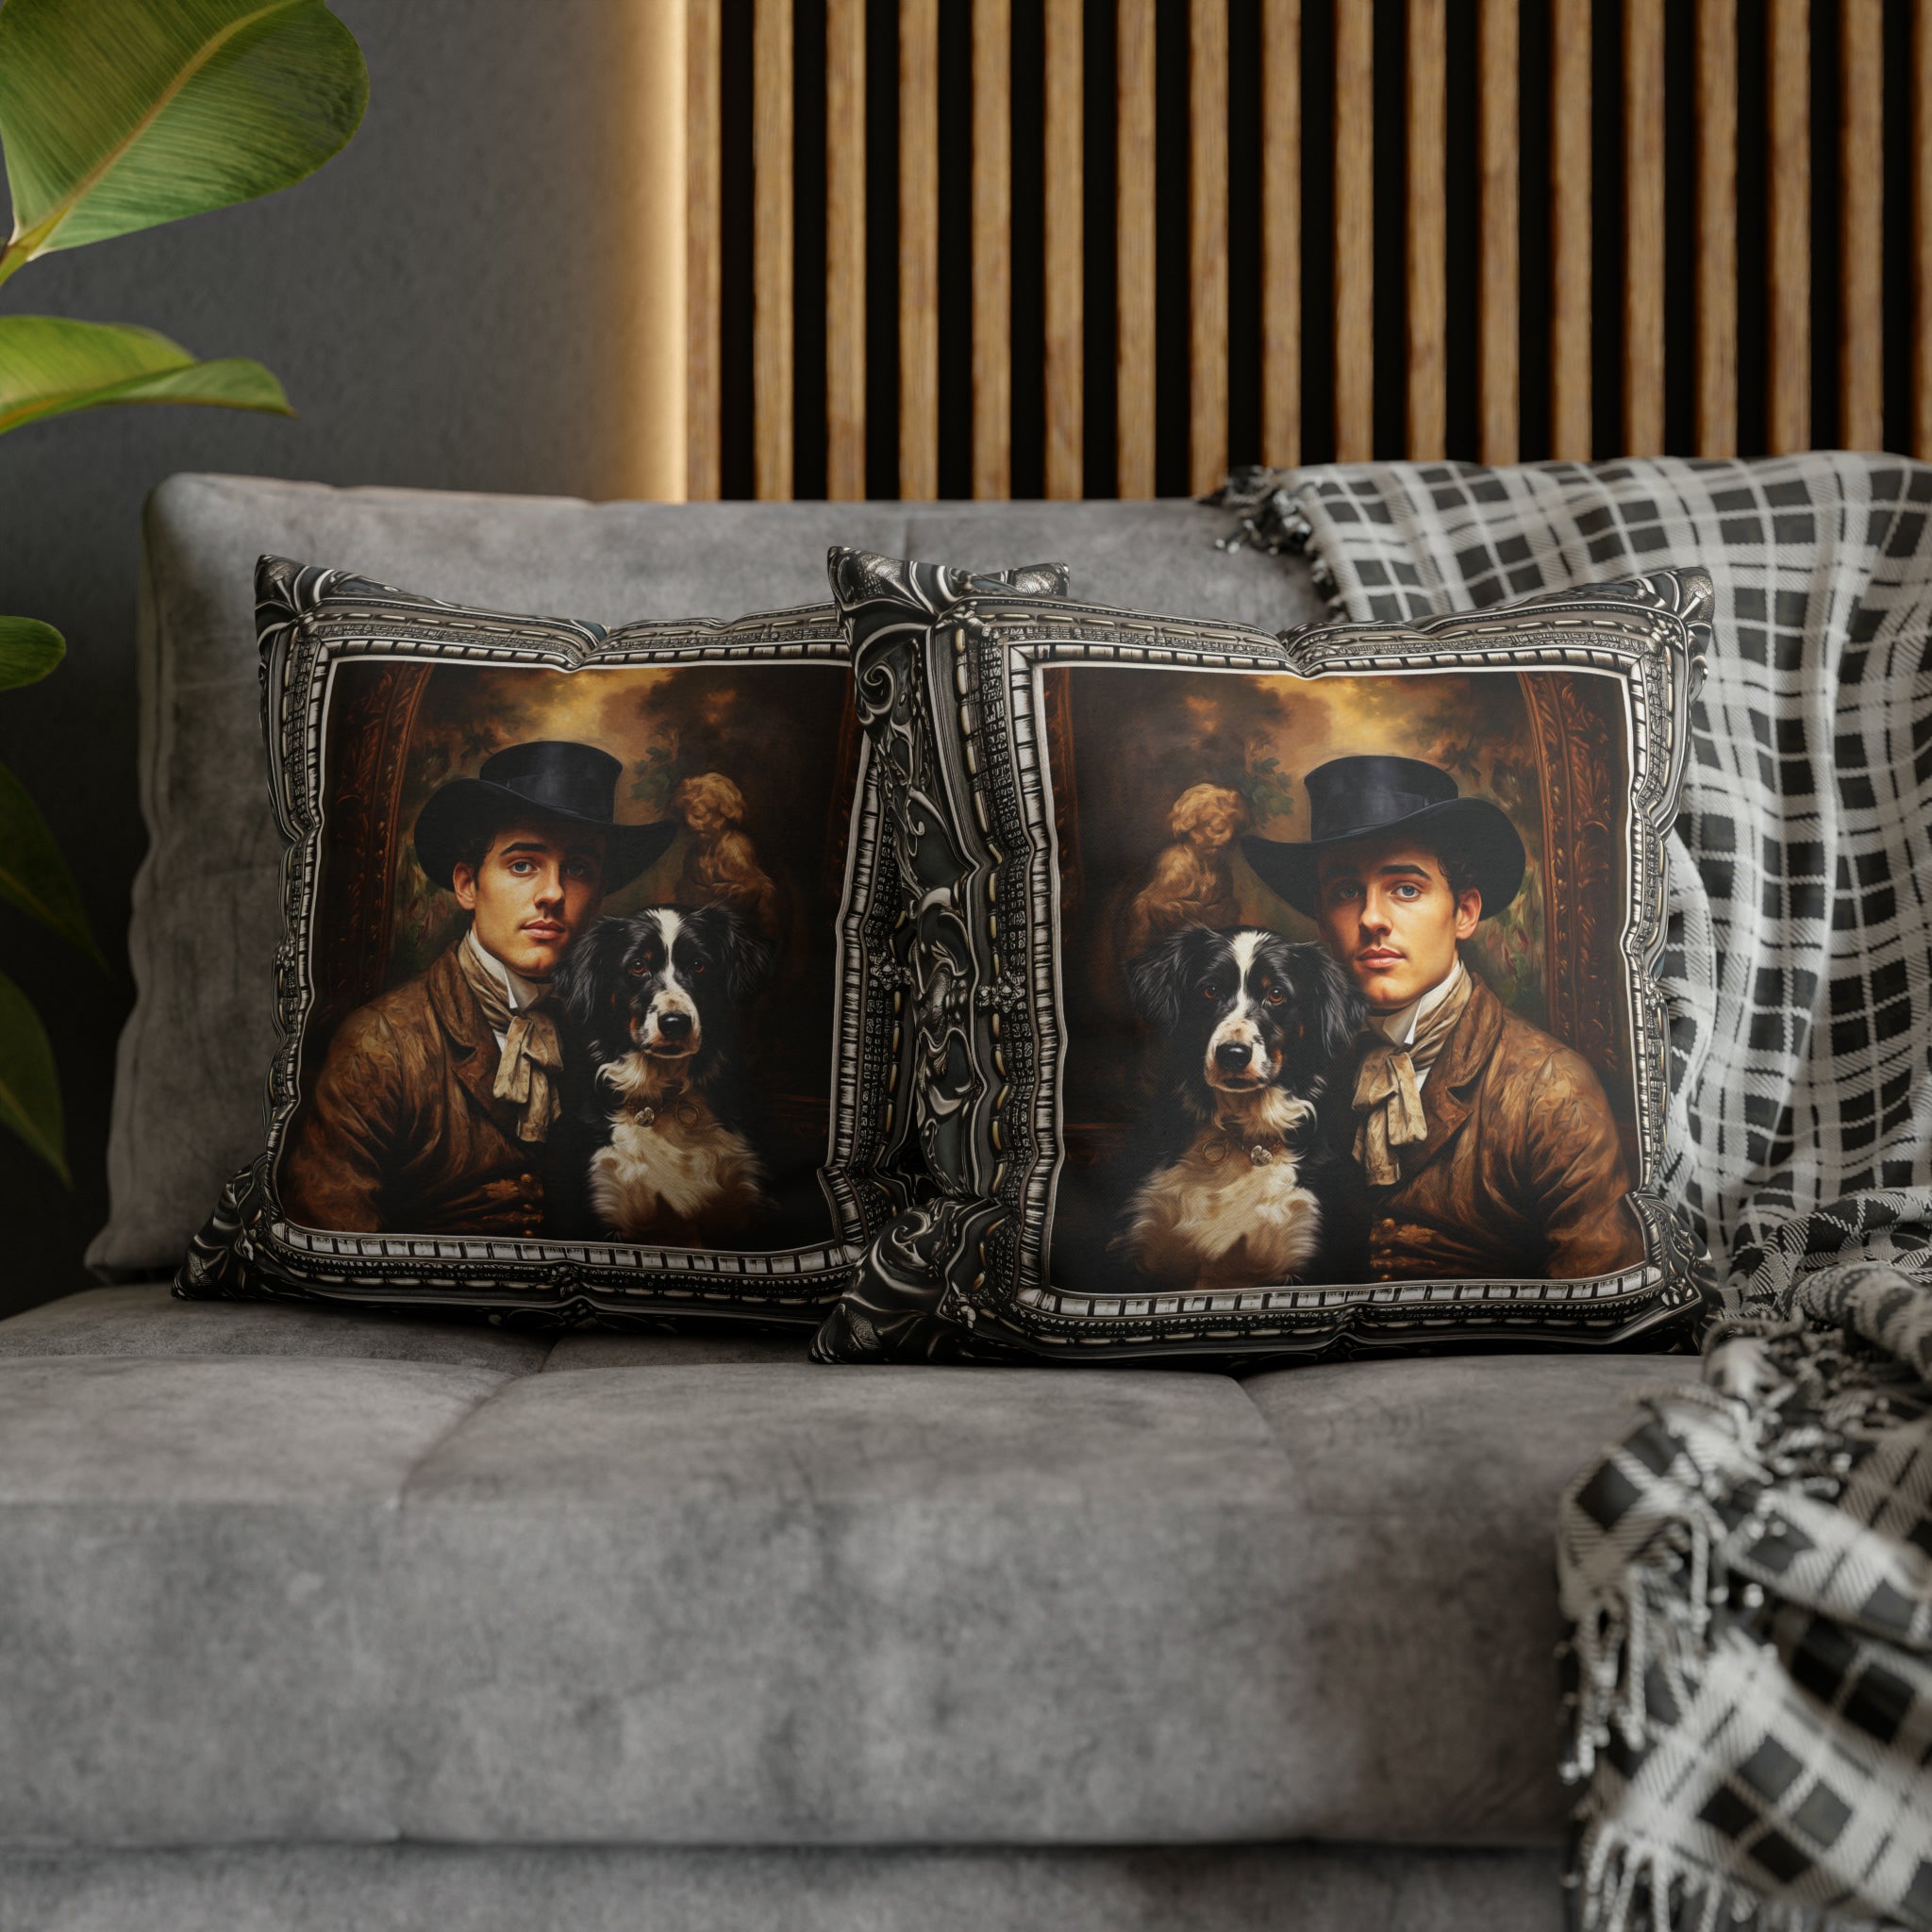 Square Pillow Case 18" x 18", CASE ONLY, no pillow form, original Art ,a Painting of a Spanish Royal and His Dog, Antique Frame